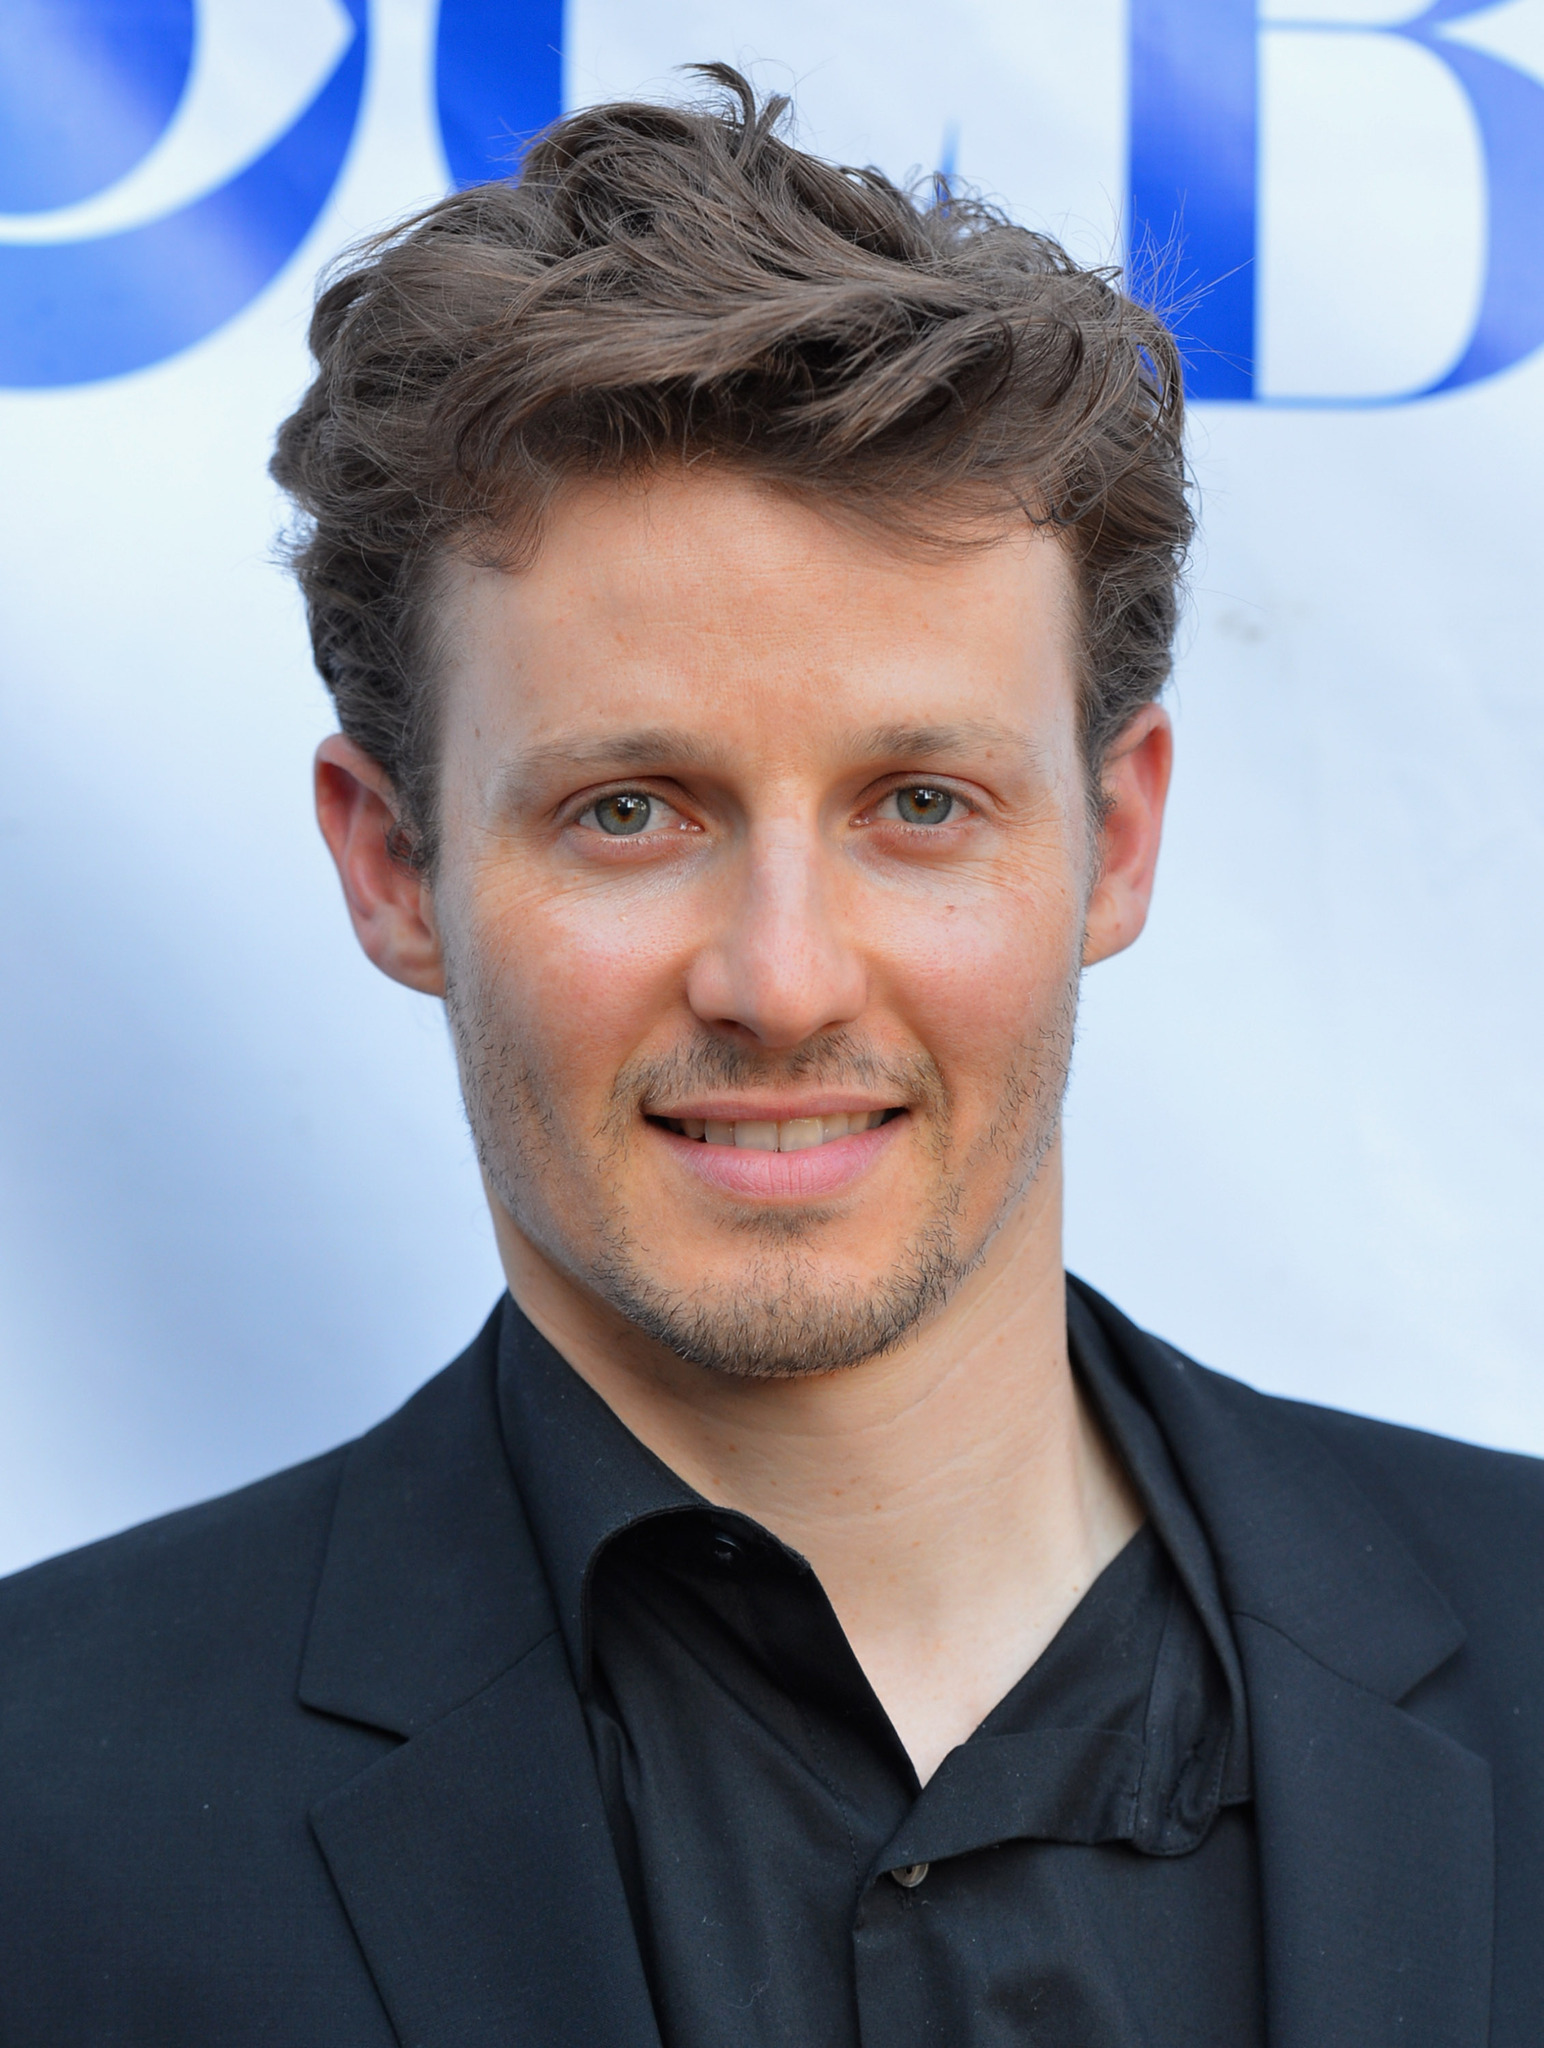 Will Estes at event of Blue Bloods (2010)